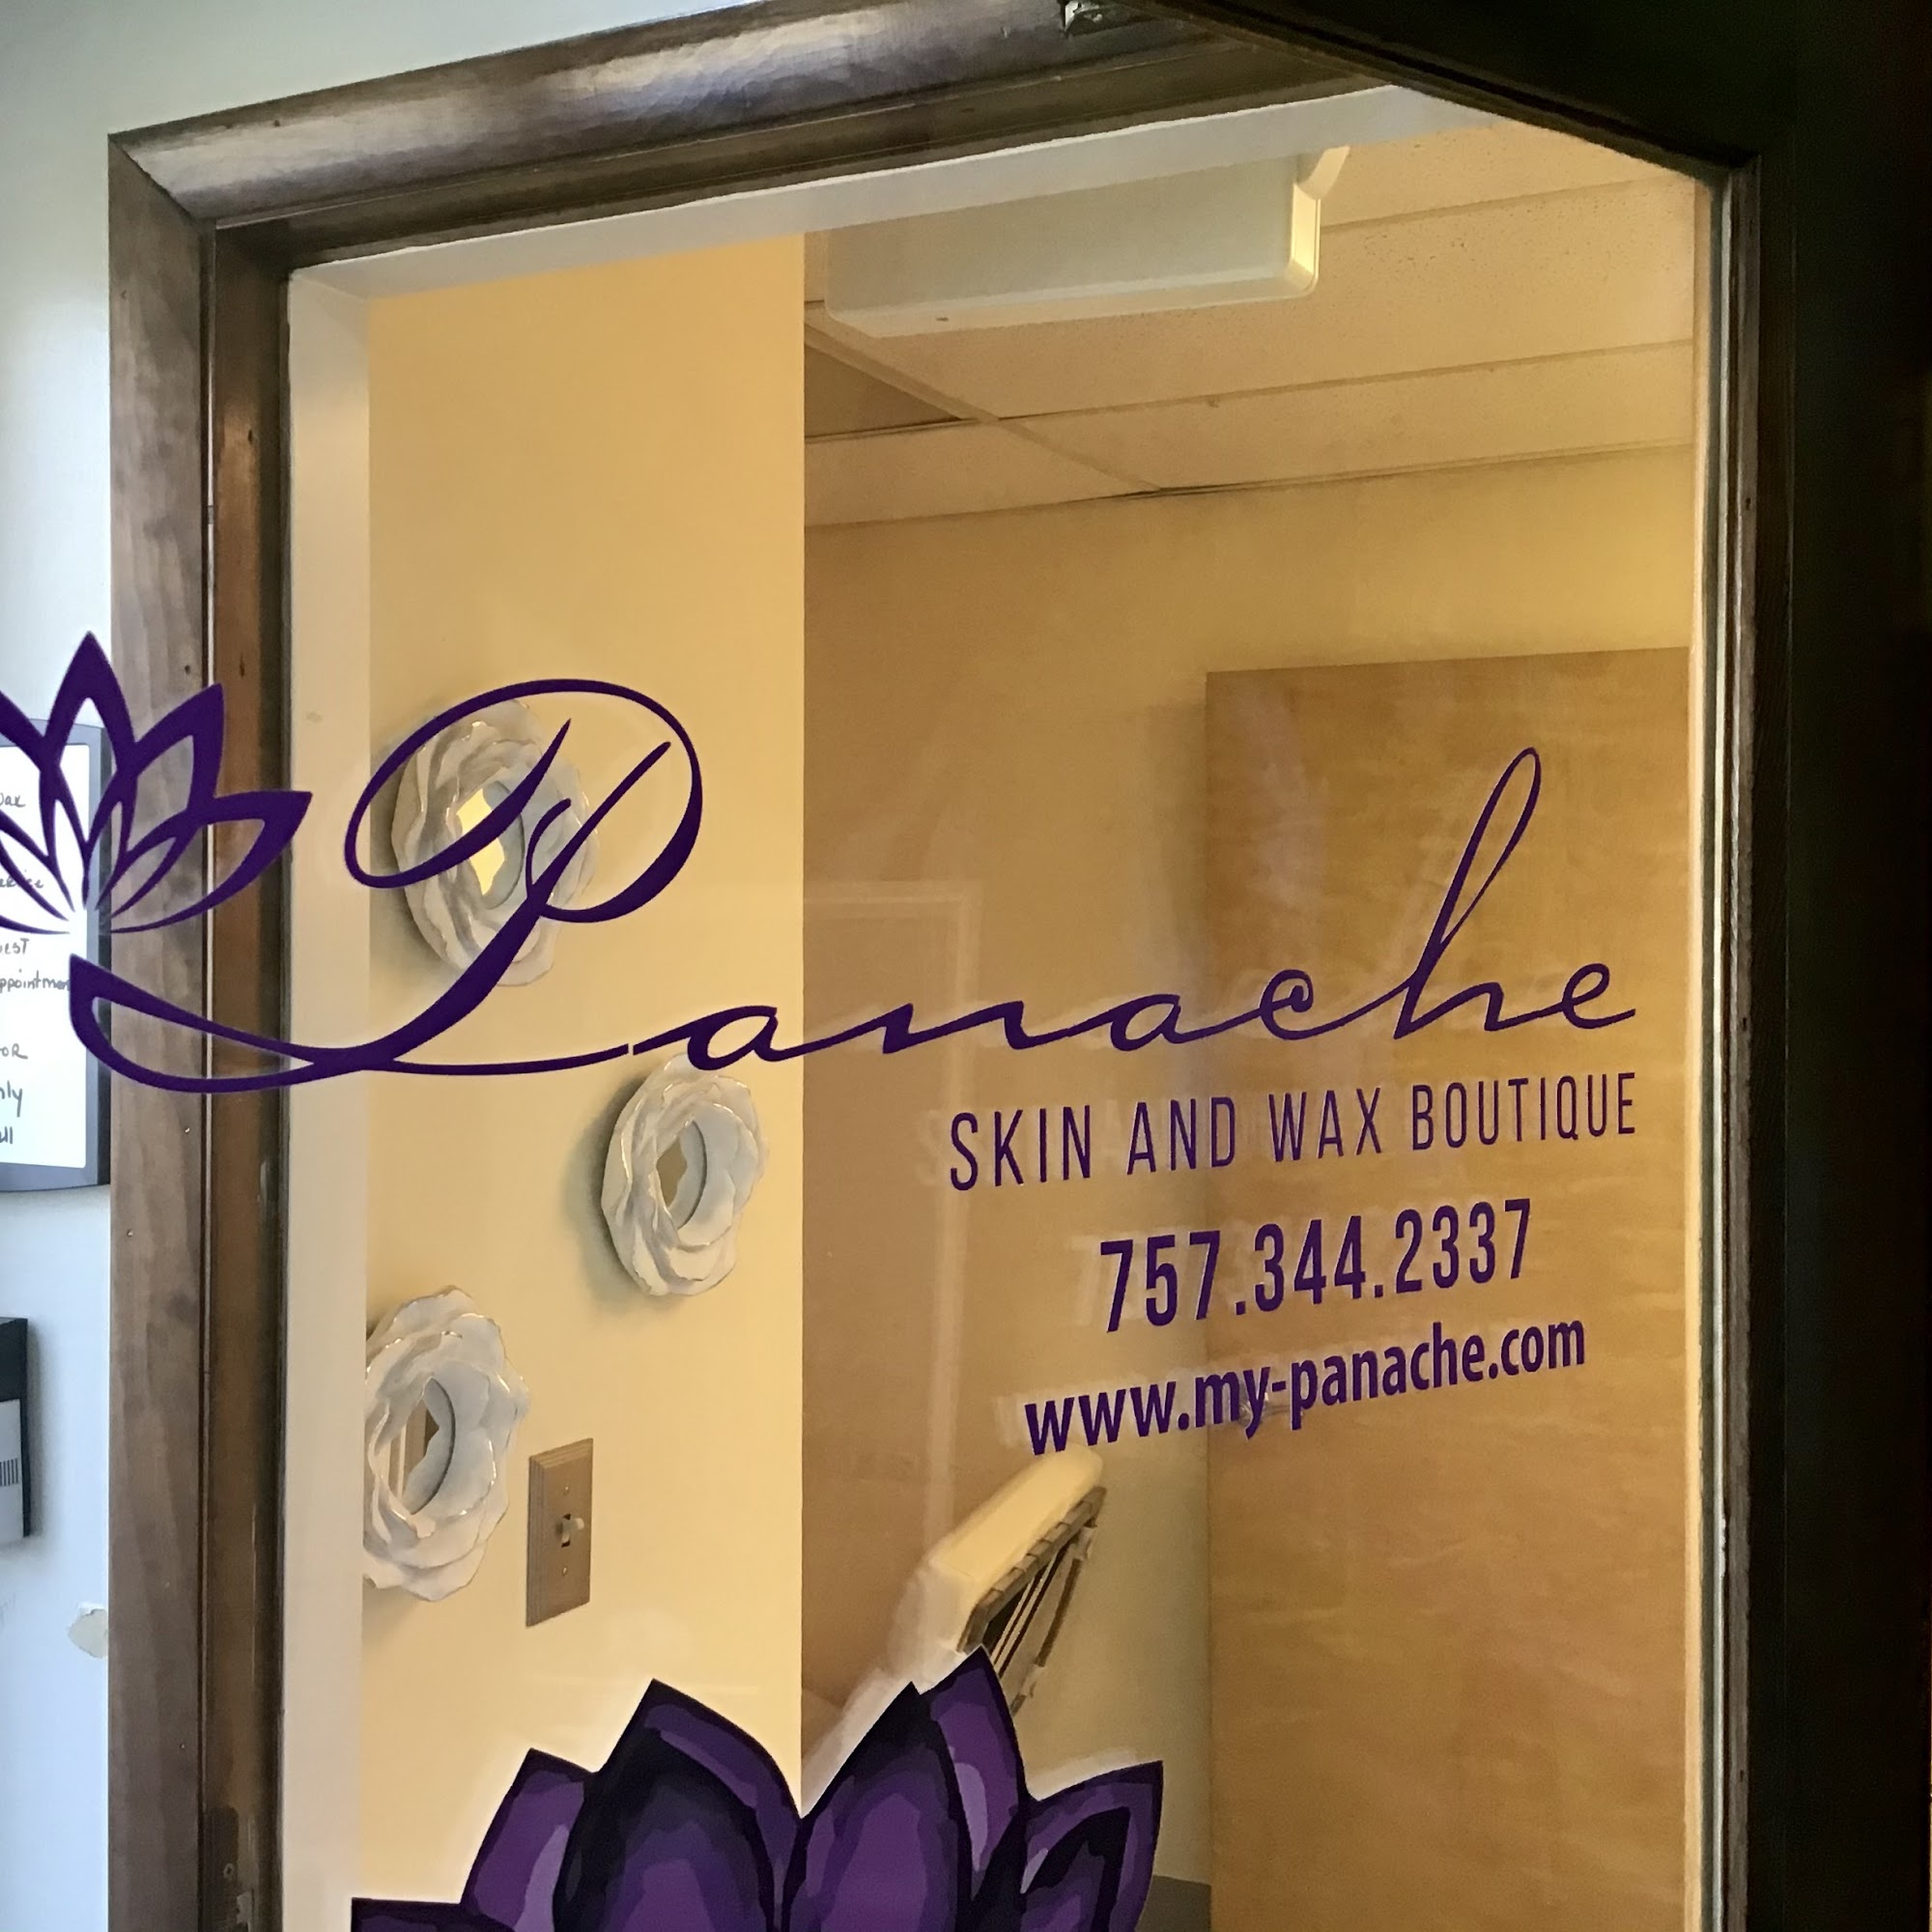 Panache Skin and Wax Boutique